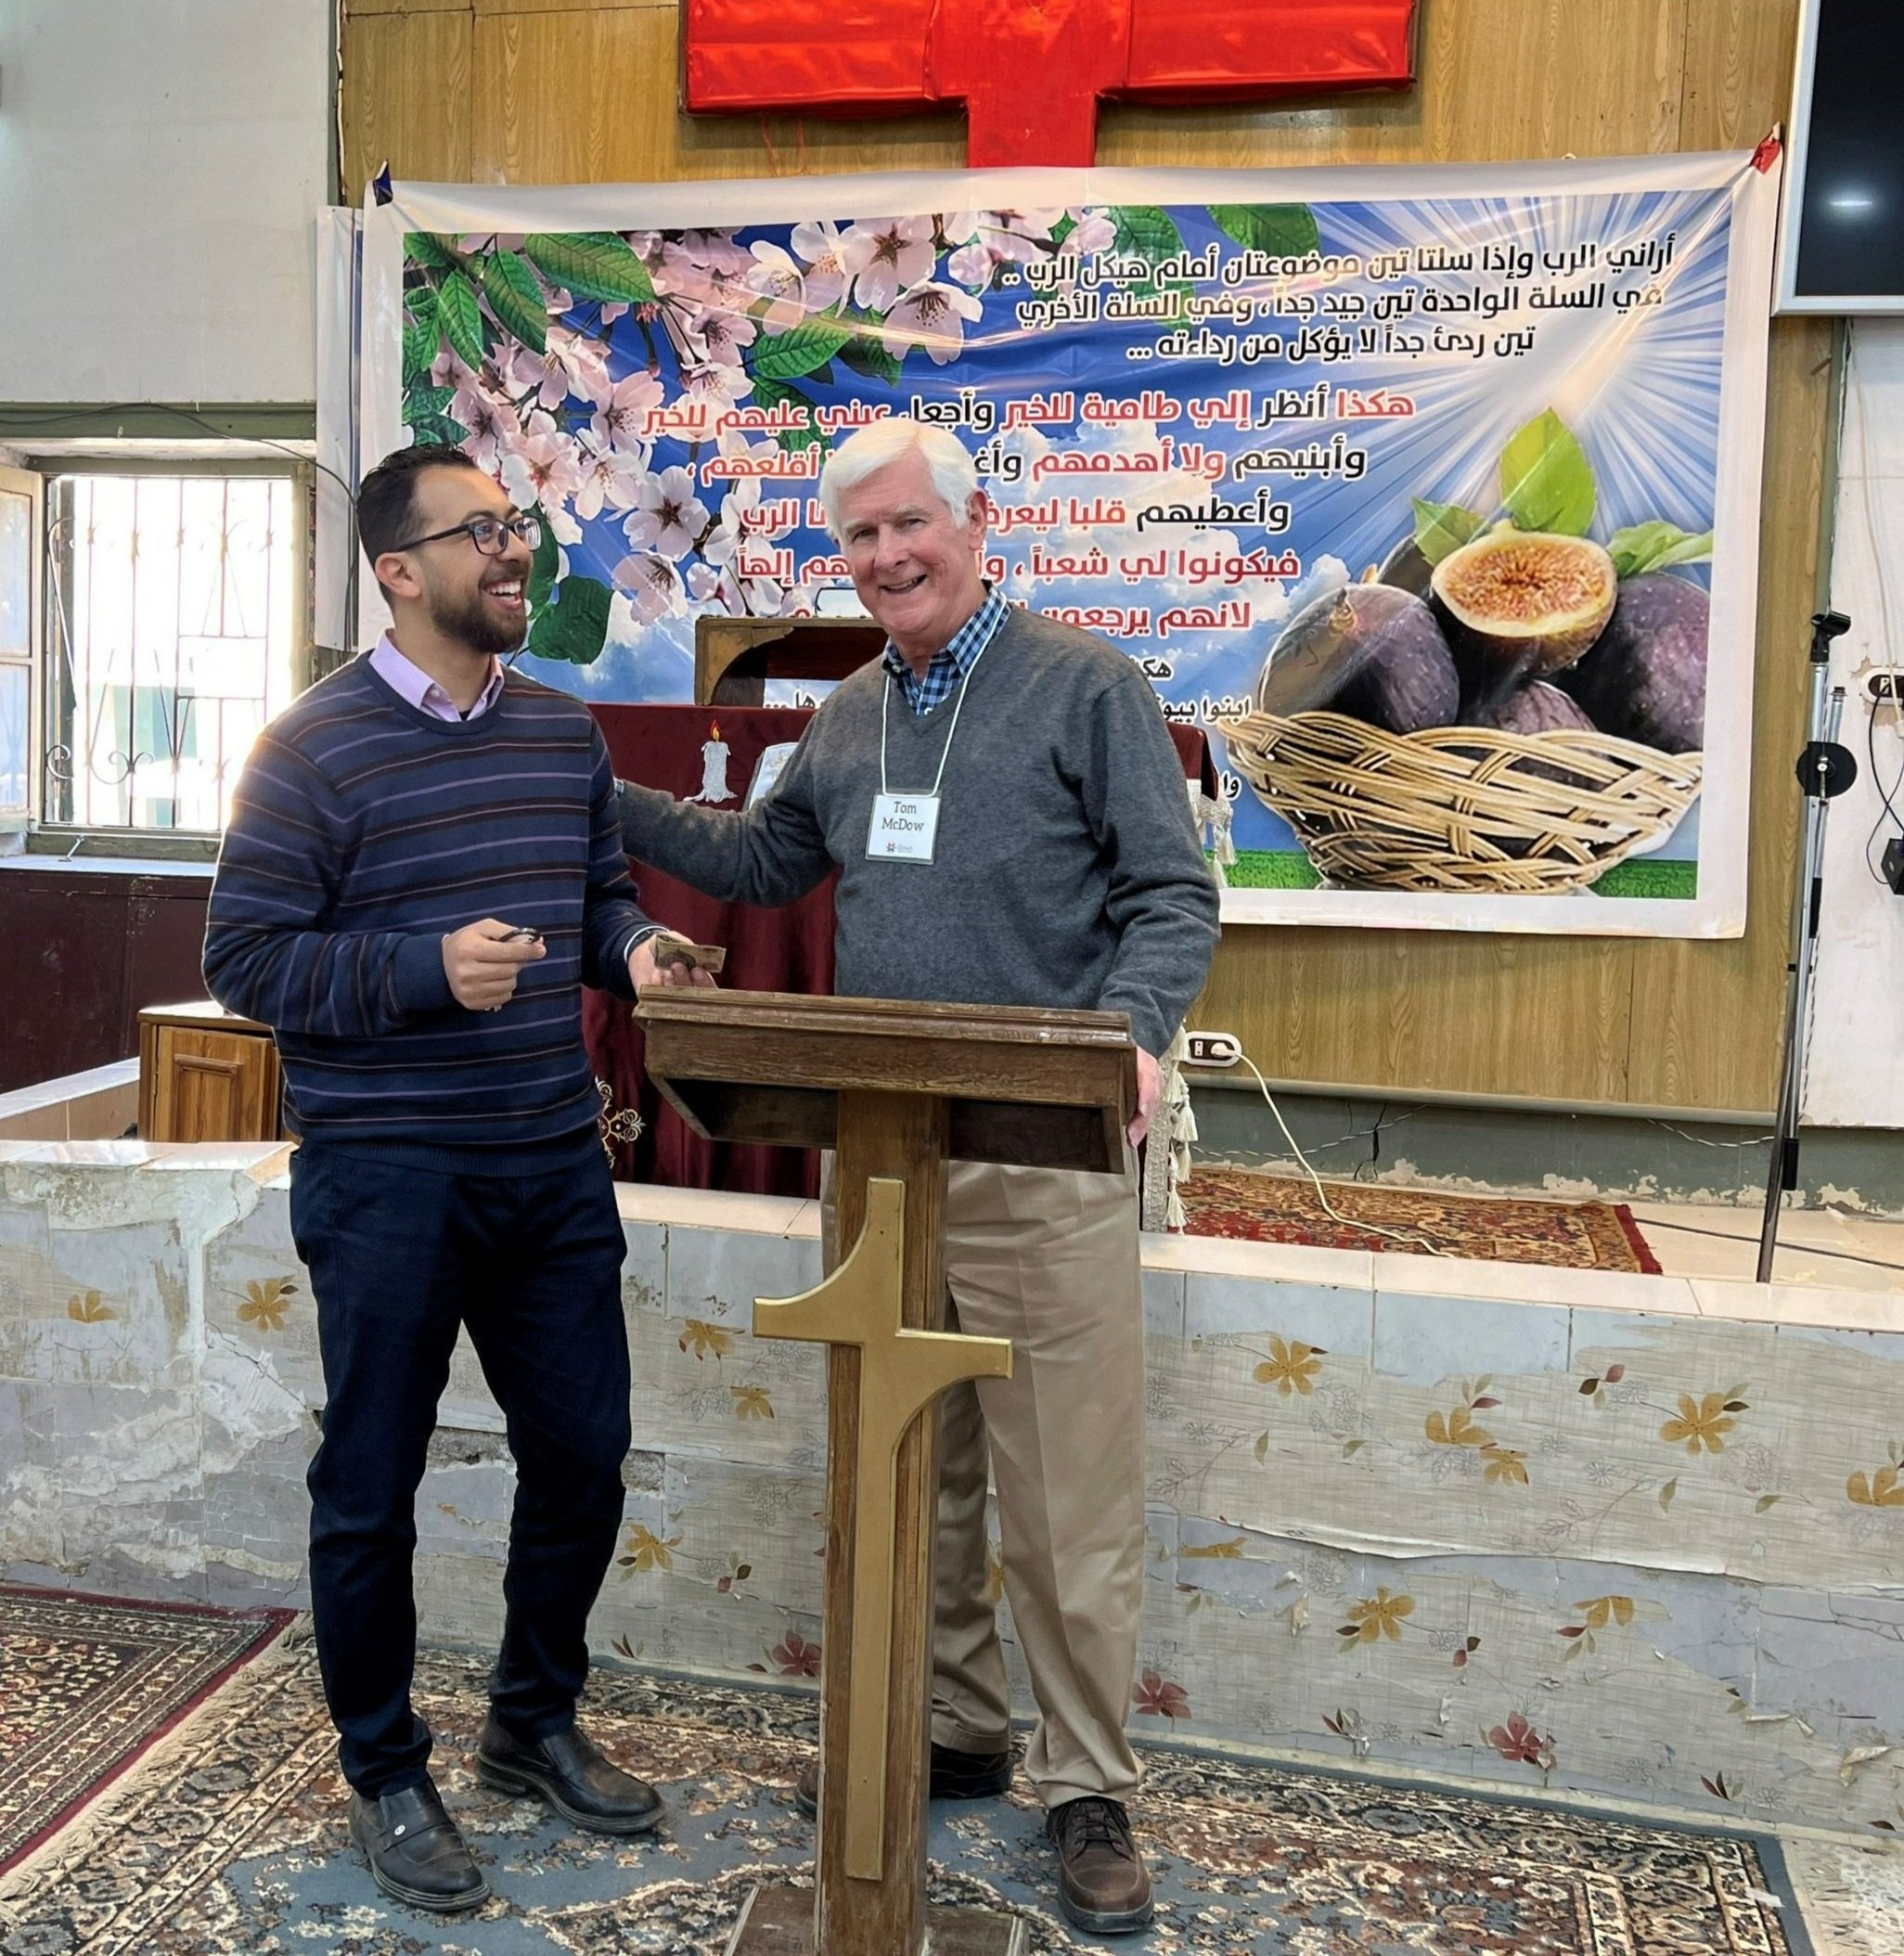  Tom McDow presented crosses shaped from the red Alabama mud where Tom grew up to pastors we visited; here he gives one to seminarian Amir, who, with his wife Irini, is doing fruitful ministry at Tamiya church and other areas in Fayoum. The banner be